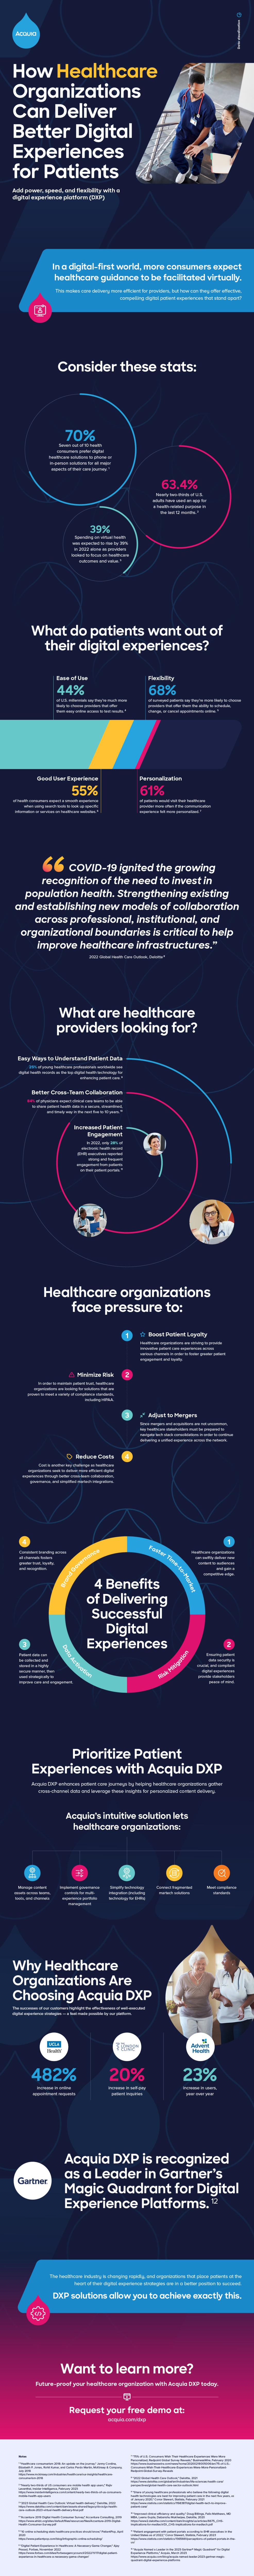 Healthcare Digital Experience Infographic